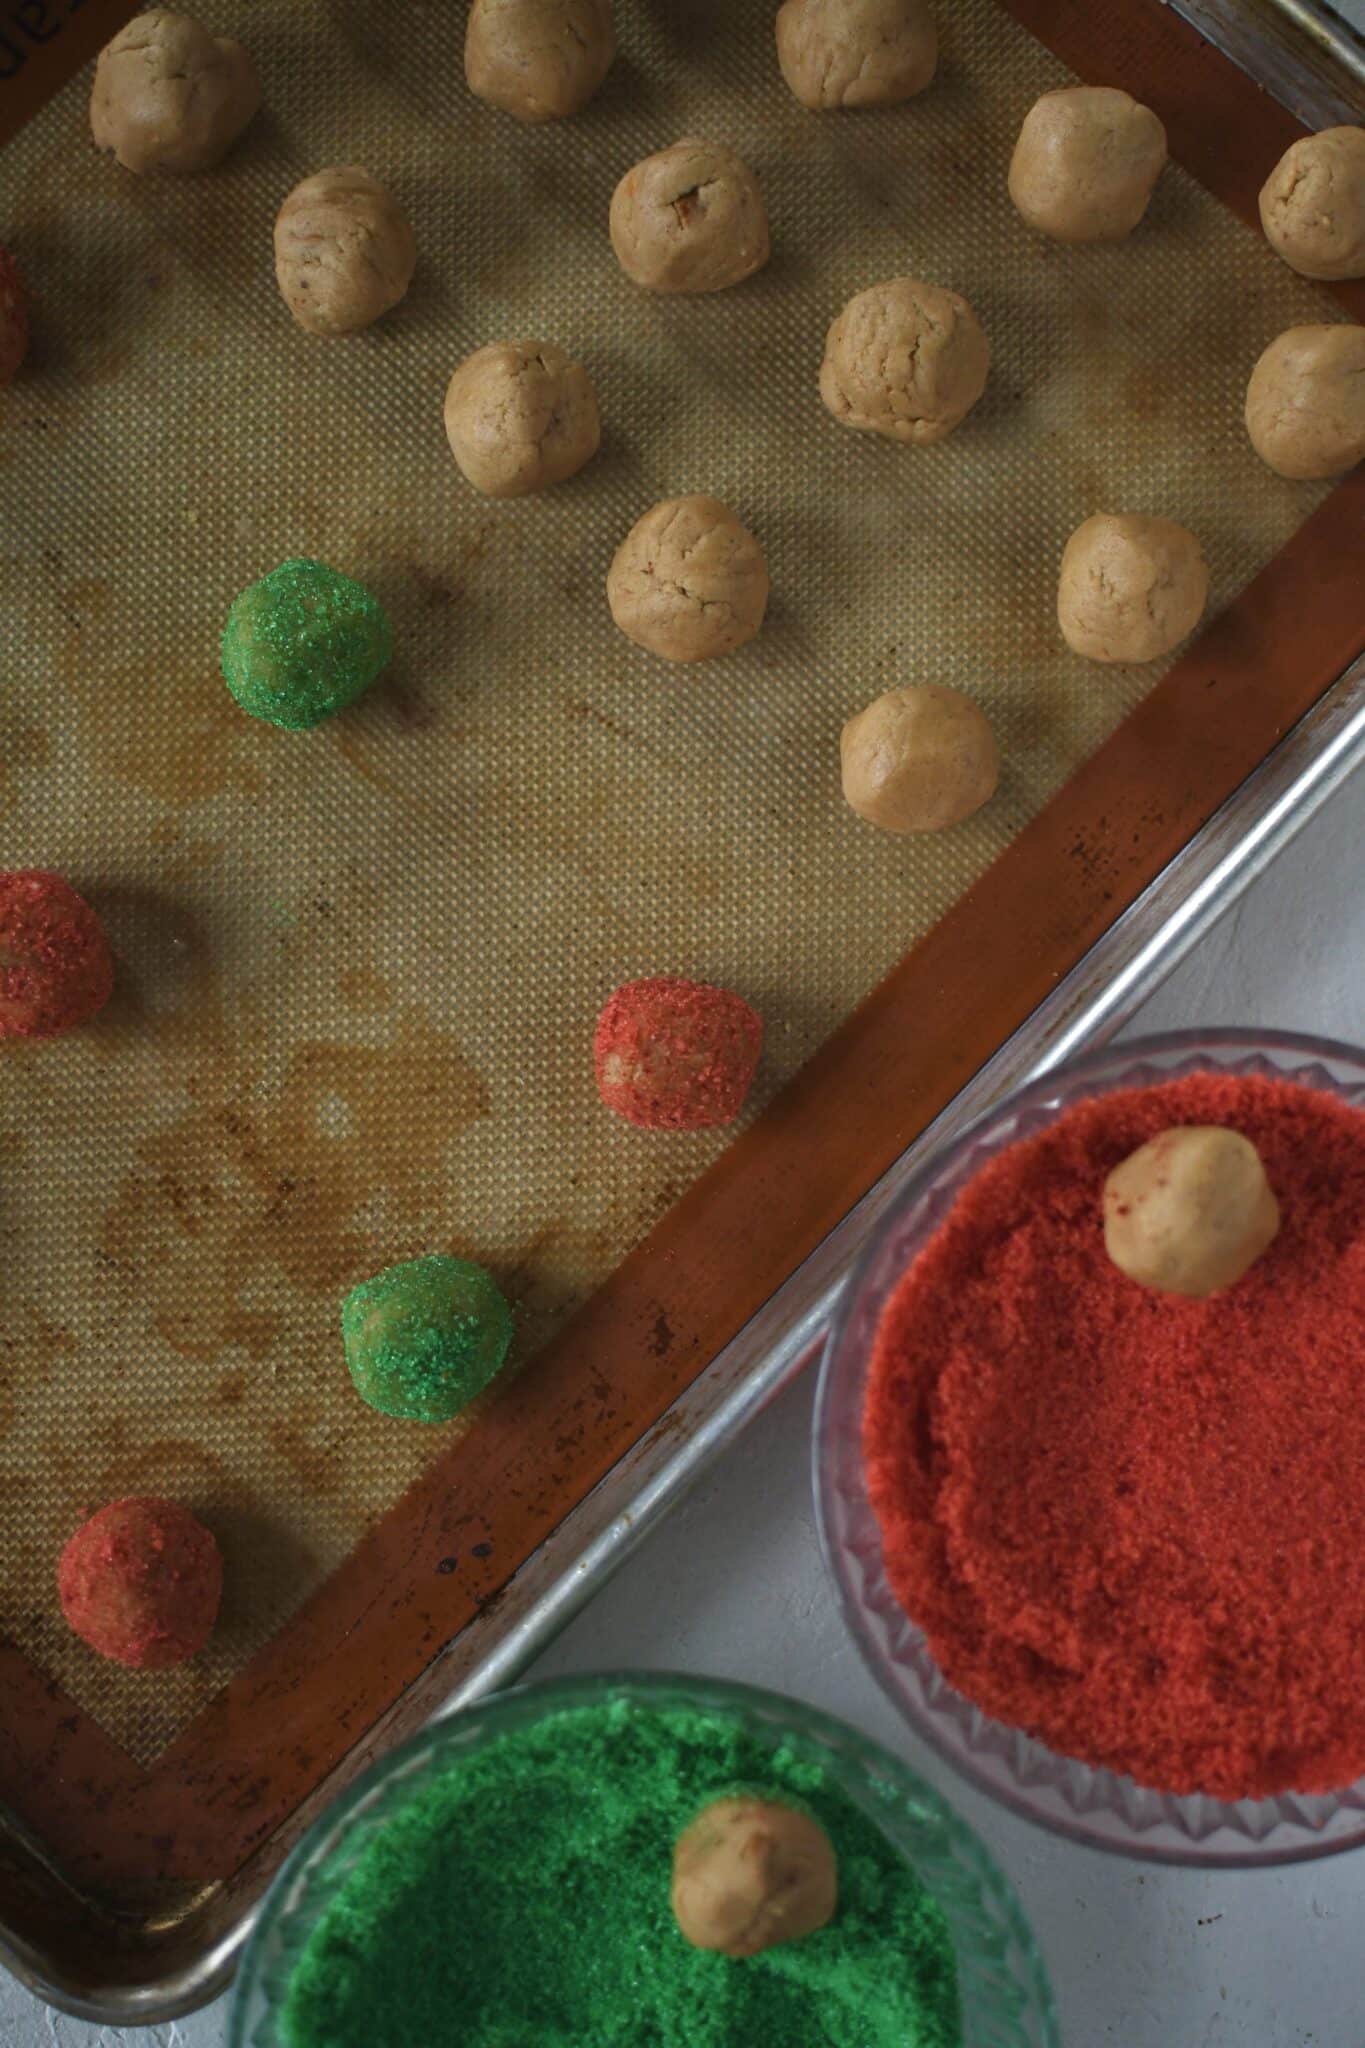 Rolling the cookie dough in red and green sugars before baking.